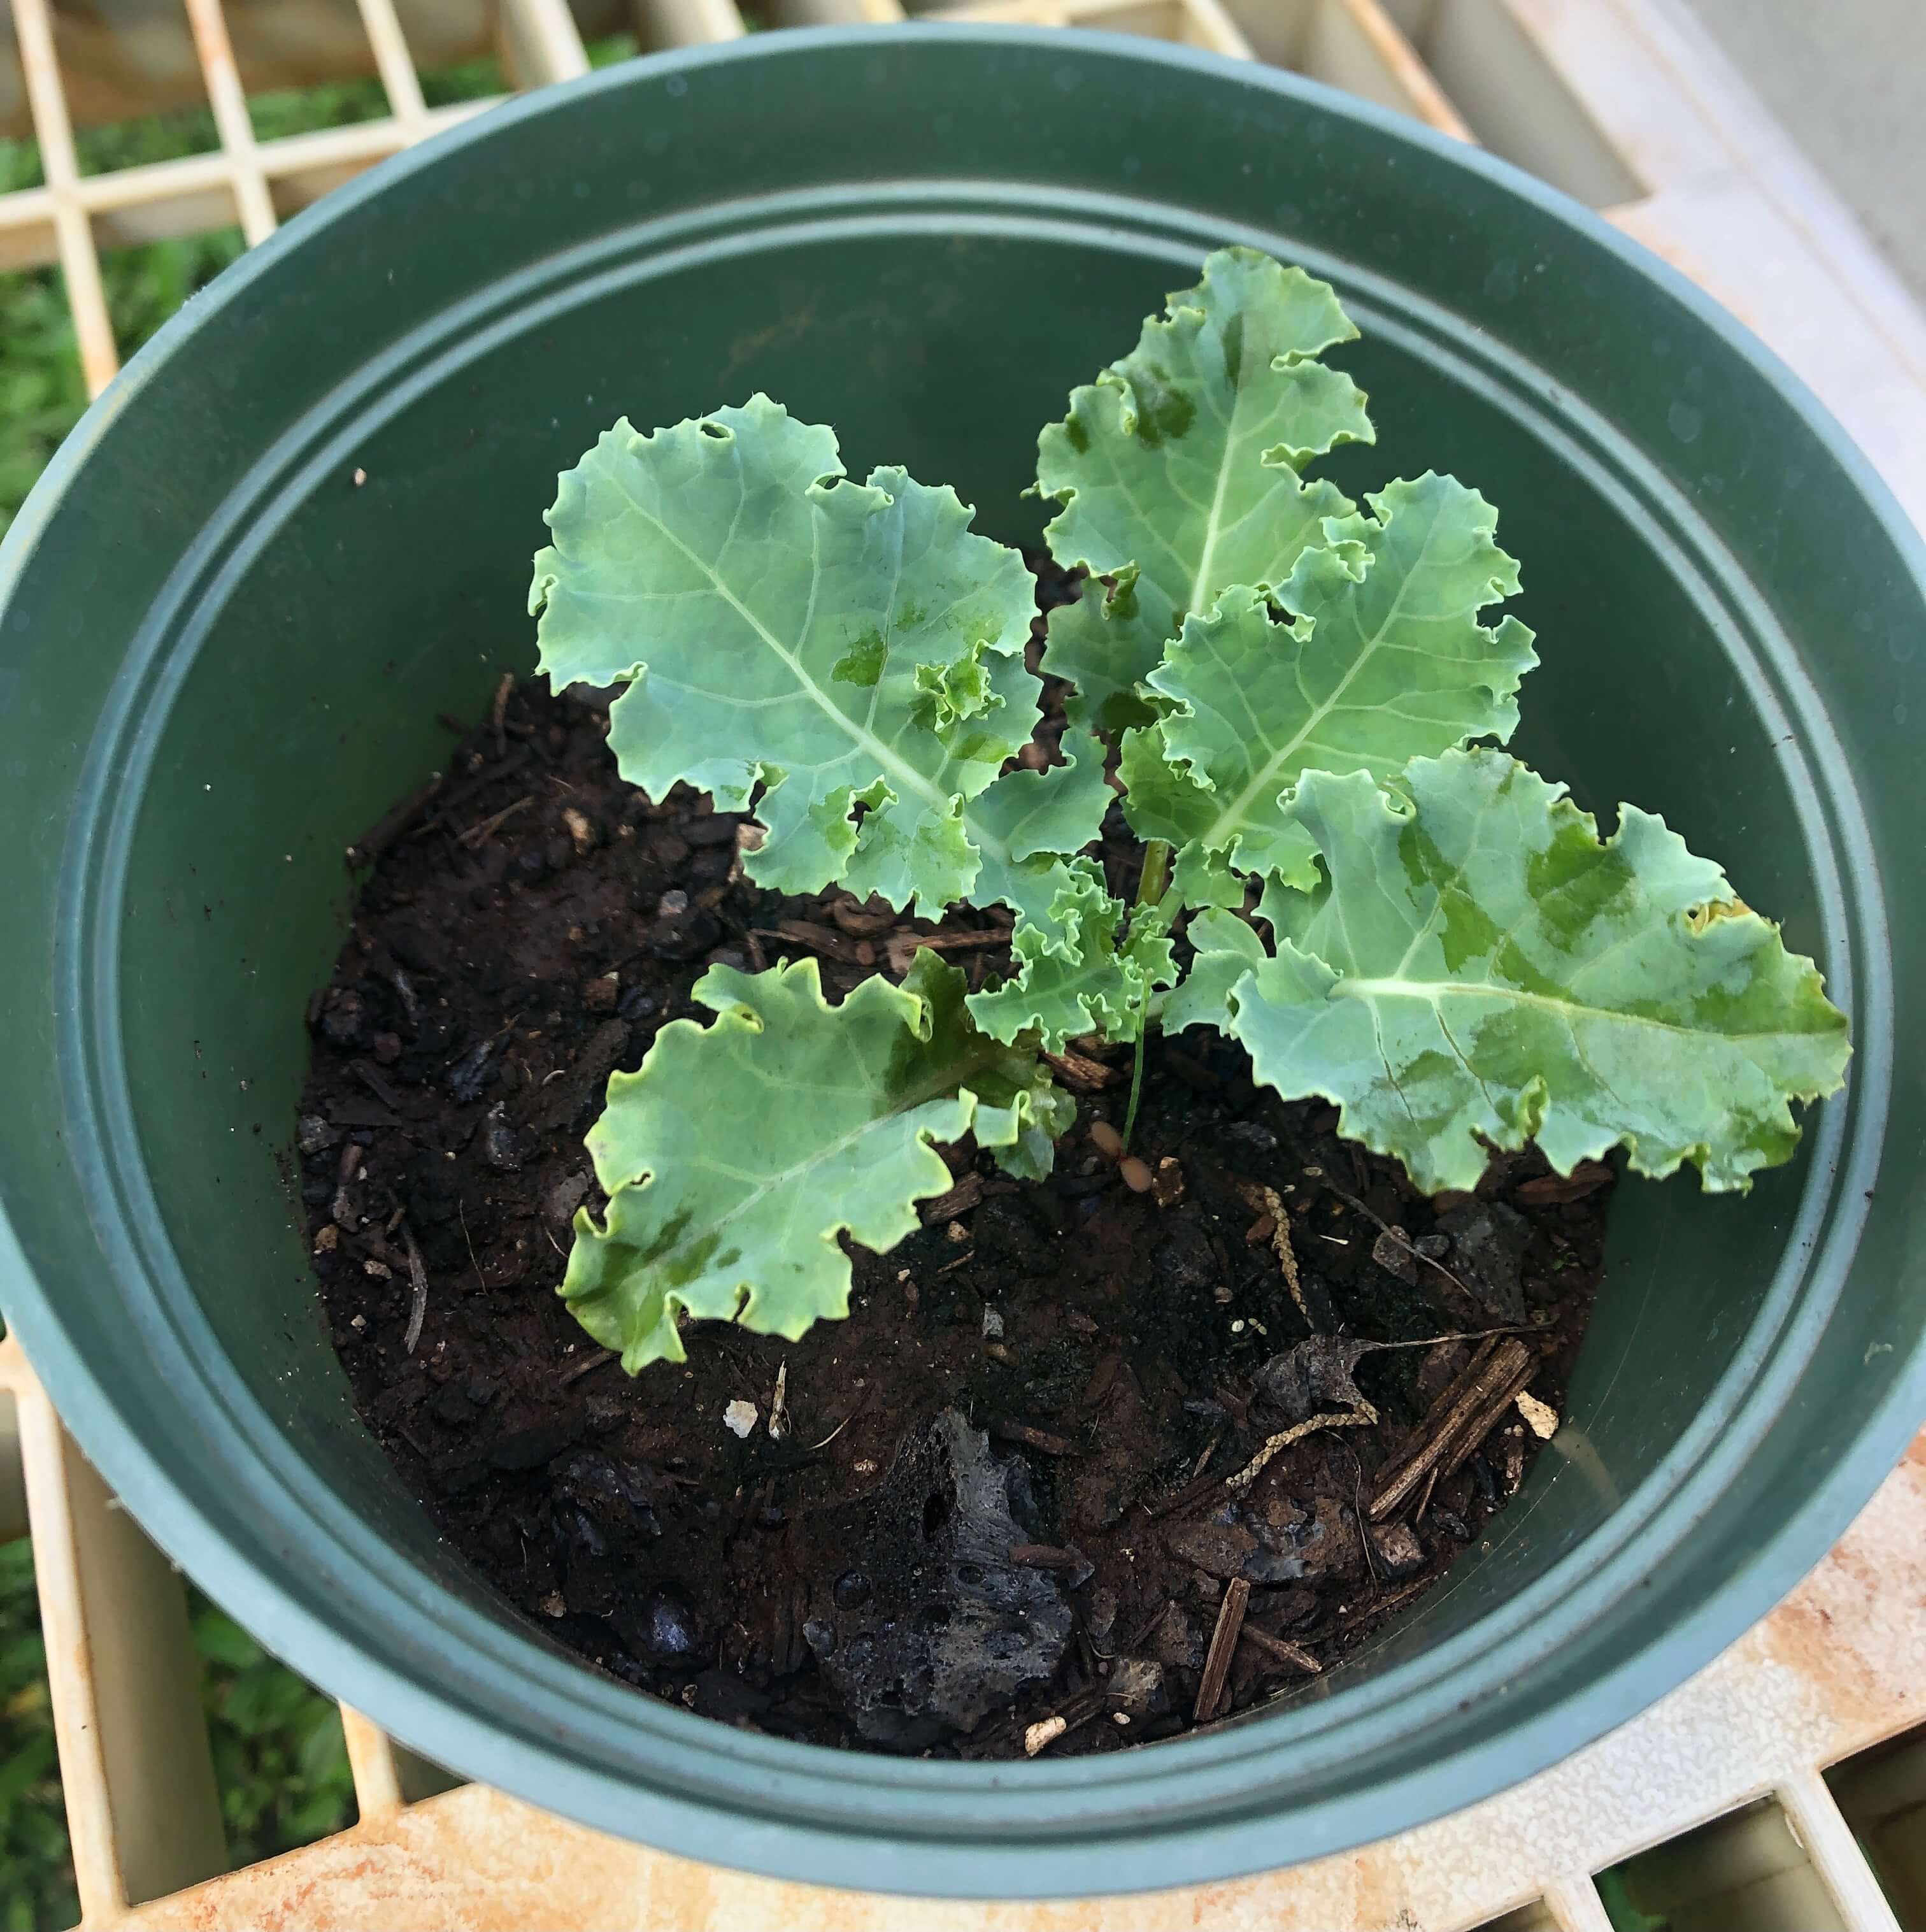 A small kale plant that grew from using compost from my kitchen.